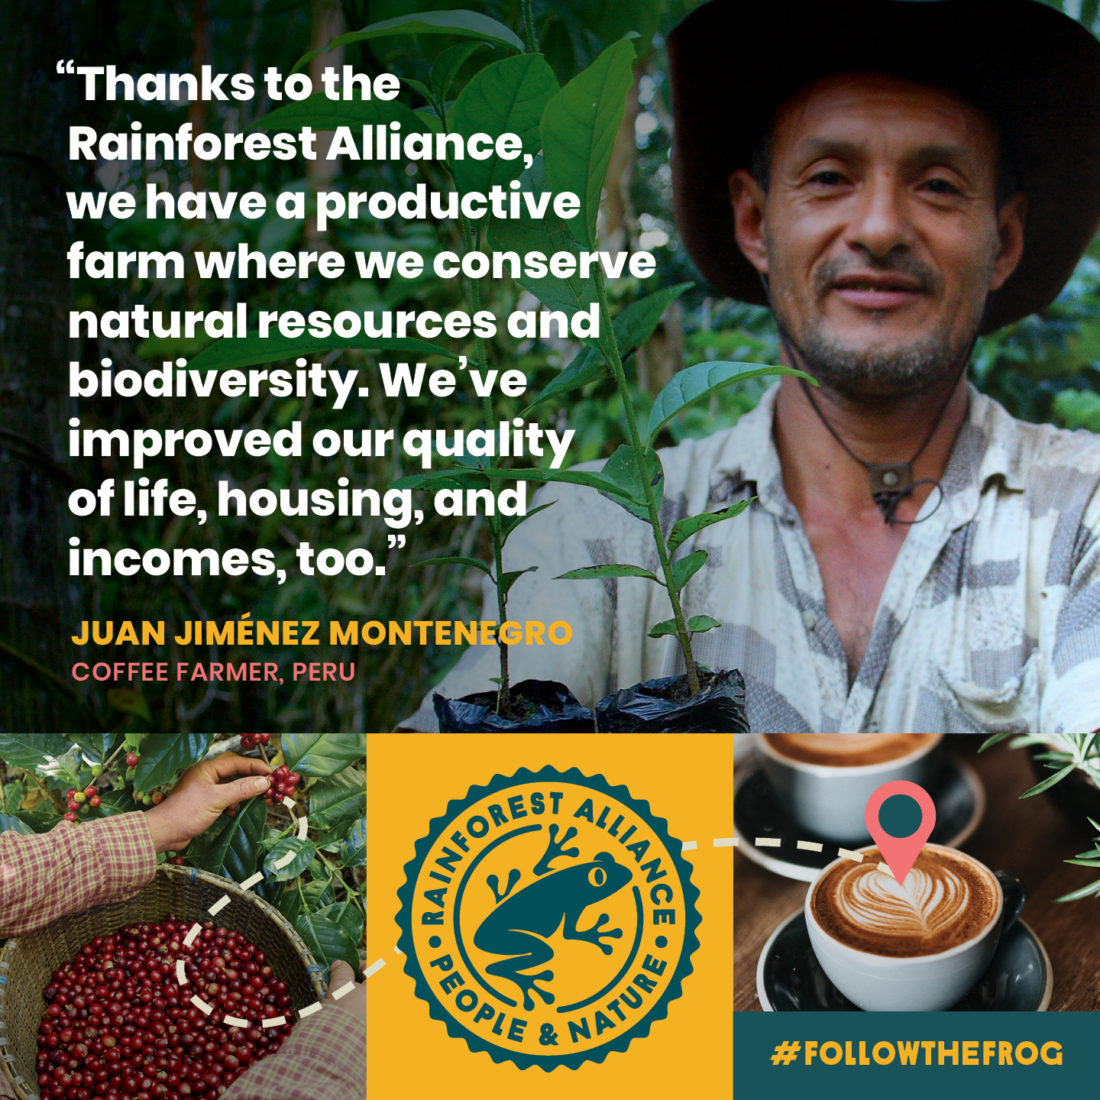 A photo collage, with one wide photo on top and three smaller photos side-by-side underneath it. The larger photo shows Juan Jiménez Montenegro, a coffee farmer from Perú. Next to this photo is the quote "Thanks to the Rainforest Alliance, we have a productive farm where we conserve natural resources and biodiversity. We've improved our quality of life, housing, and incomes too." The three smaller photos depict a farmer's hand picking coffee fruit, the Rainforest Alliance logo, and a small mug of coffee. A dotted line and navigation point, like you would see in a navigation app, connect the three images.